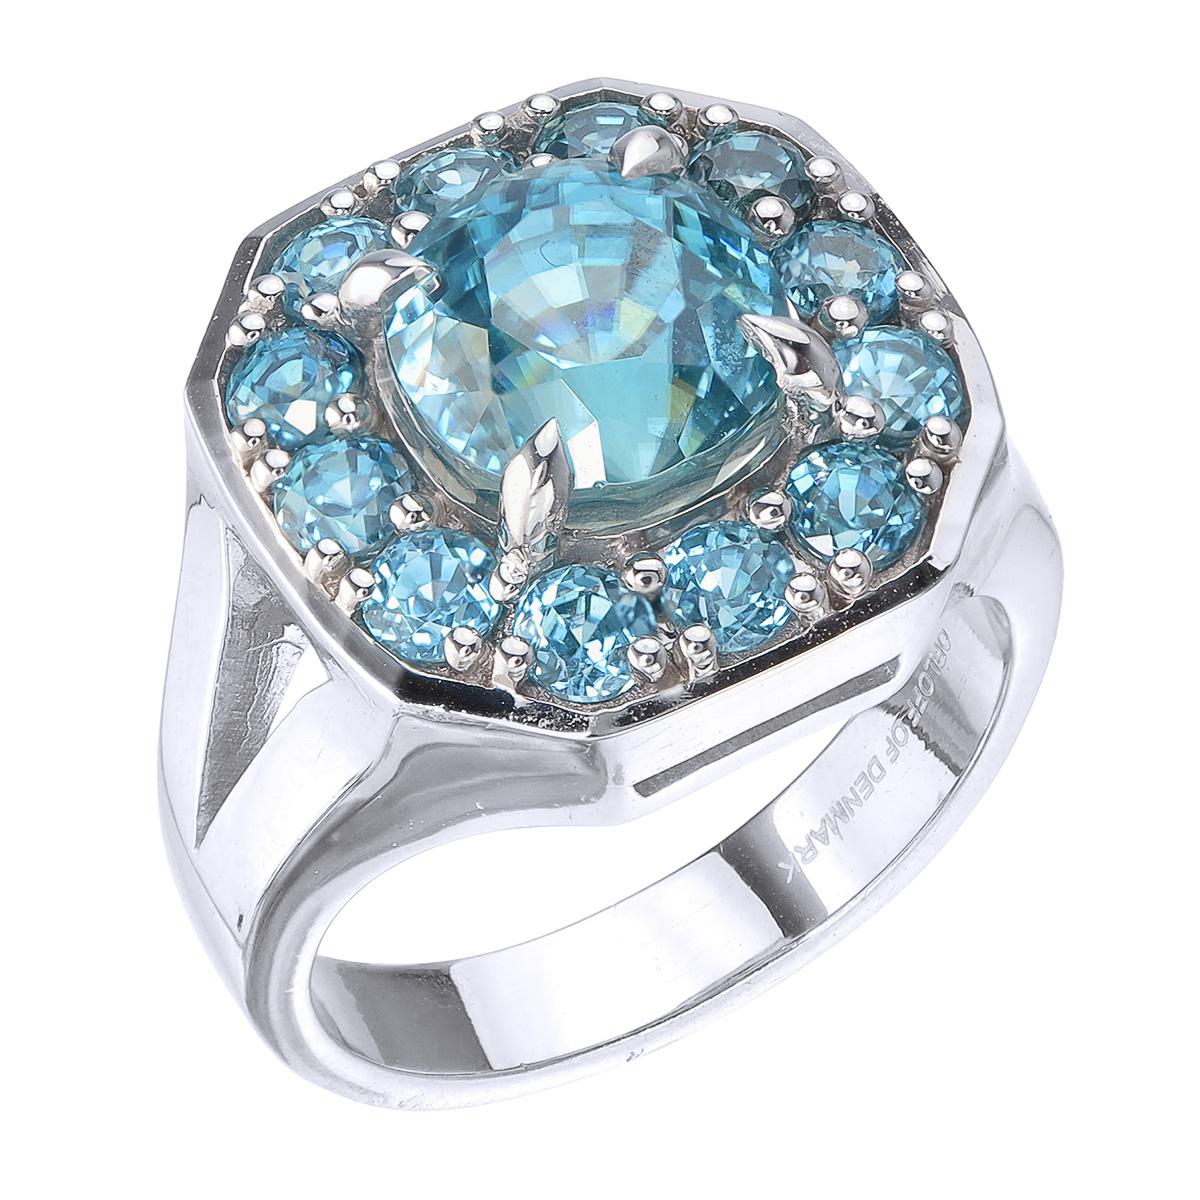 Orloff of Denmark; 925 Sterling Silver Cocktail Ring set with thirteen Natural Cambodian Blue Zircons totaling to 9.4 carats.

This piece has been meticulously hand-crafted out of 925 sterling silver.
In the center sits a 6.55 carat blue zircon